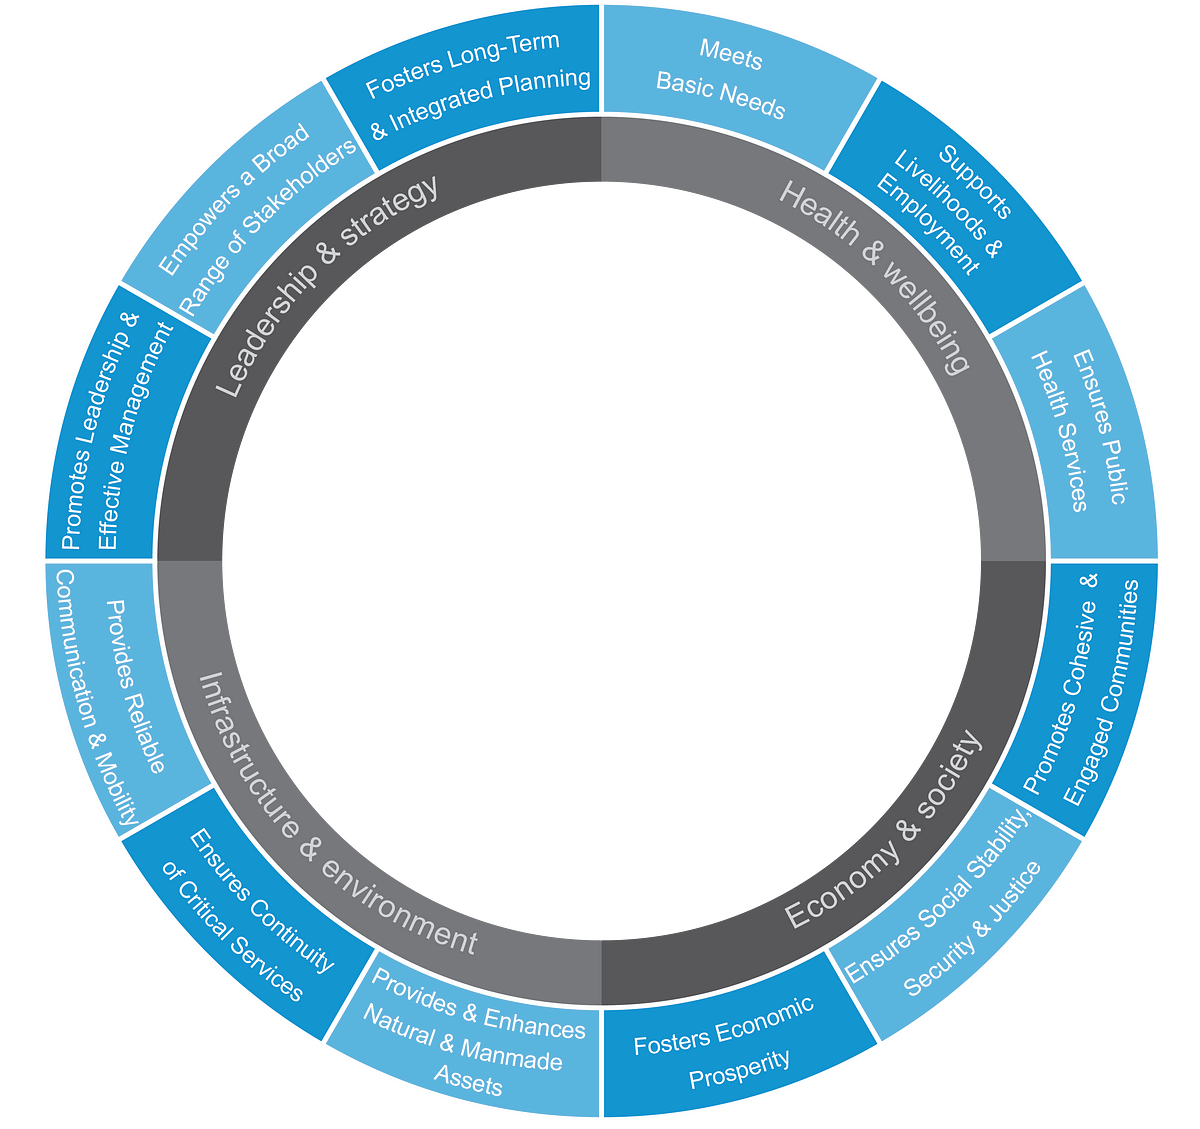 A circular diagram which showing the four essential systems of a city as parts of a circle. These are, Health & Wellbeing, Economy & Society, Infrastructure & Environment and Leadership & Strategy. There is an outer ring which shows the three drivers for each of the essential systems. The drivers for Health & Wellbeing are Meets Basic Needs, Supports Livelihoods & Employment, and Ensures Public Health Services. The three drivers for Economy & society are Fosters economic prosperity, ensure social stability, security and justice, and promotes cohesive and engaged communities. The three drivers for infrastructure and environment are provides reliable communication and mobility, ensure continuity of critical services and provides & enhances natural & manmade assets. The three drivers for Leadership and strategy are promotes leadership & effective management, empors a broad range of stakeholders and fosters long-term & integrated planning.